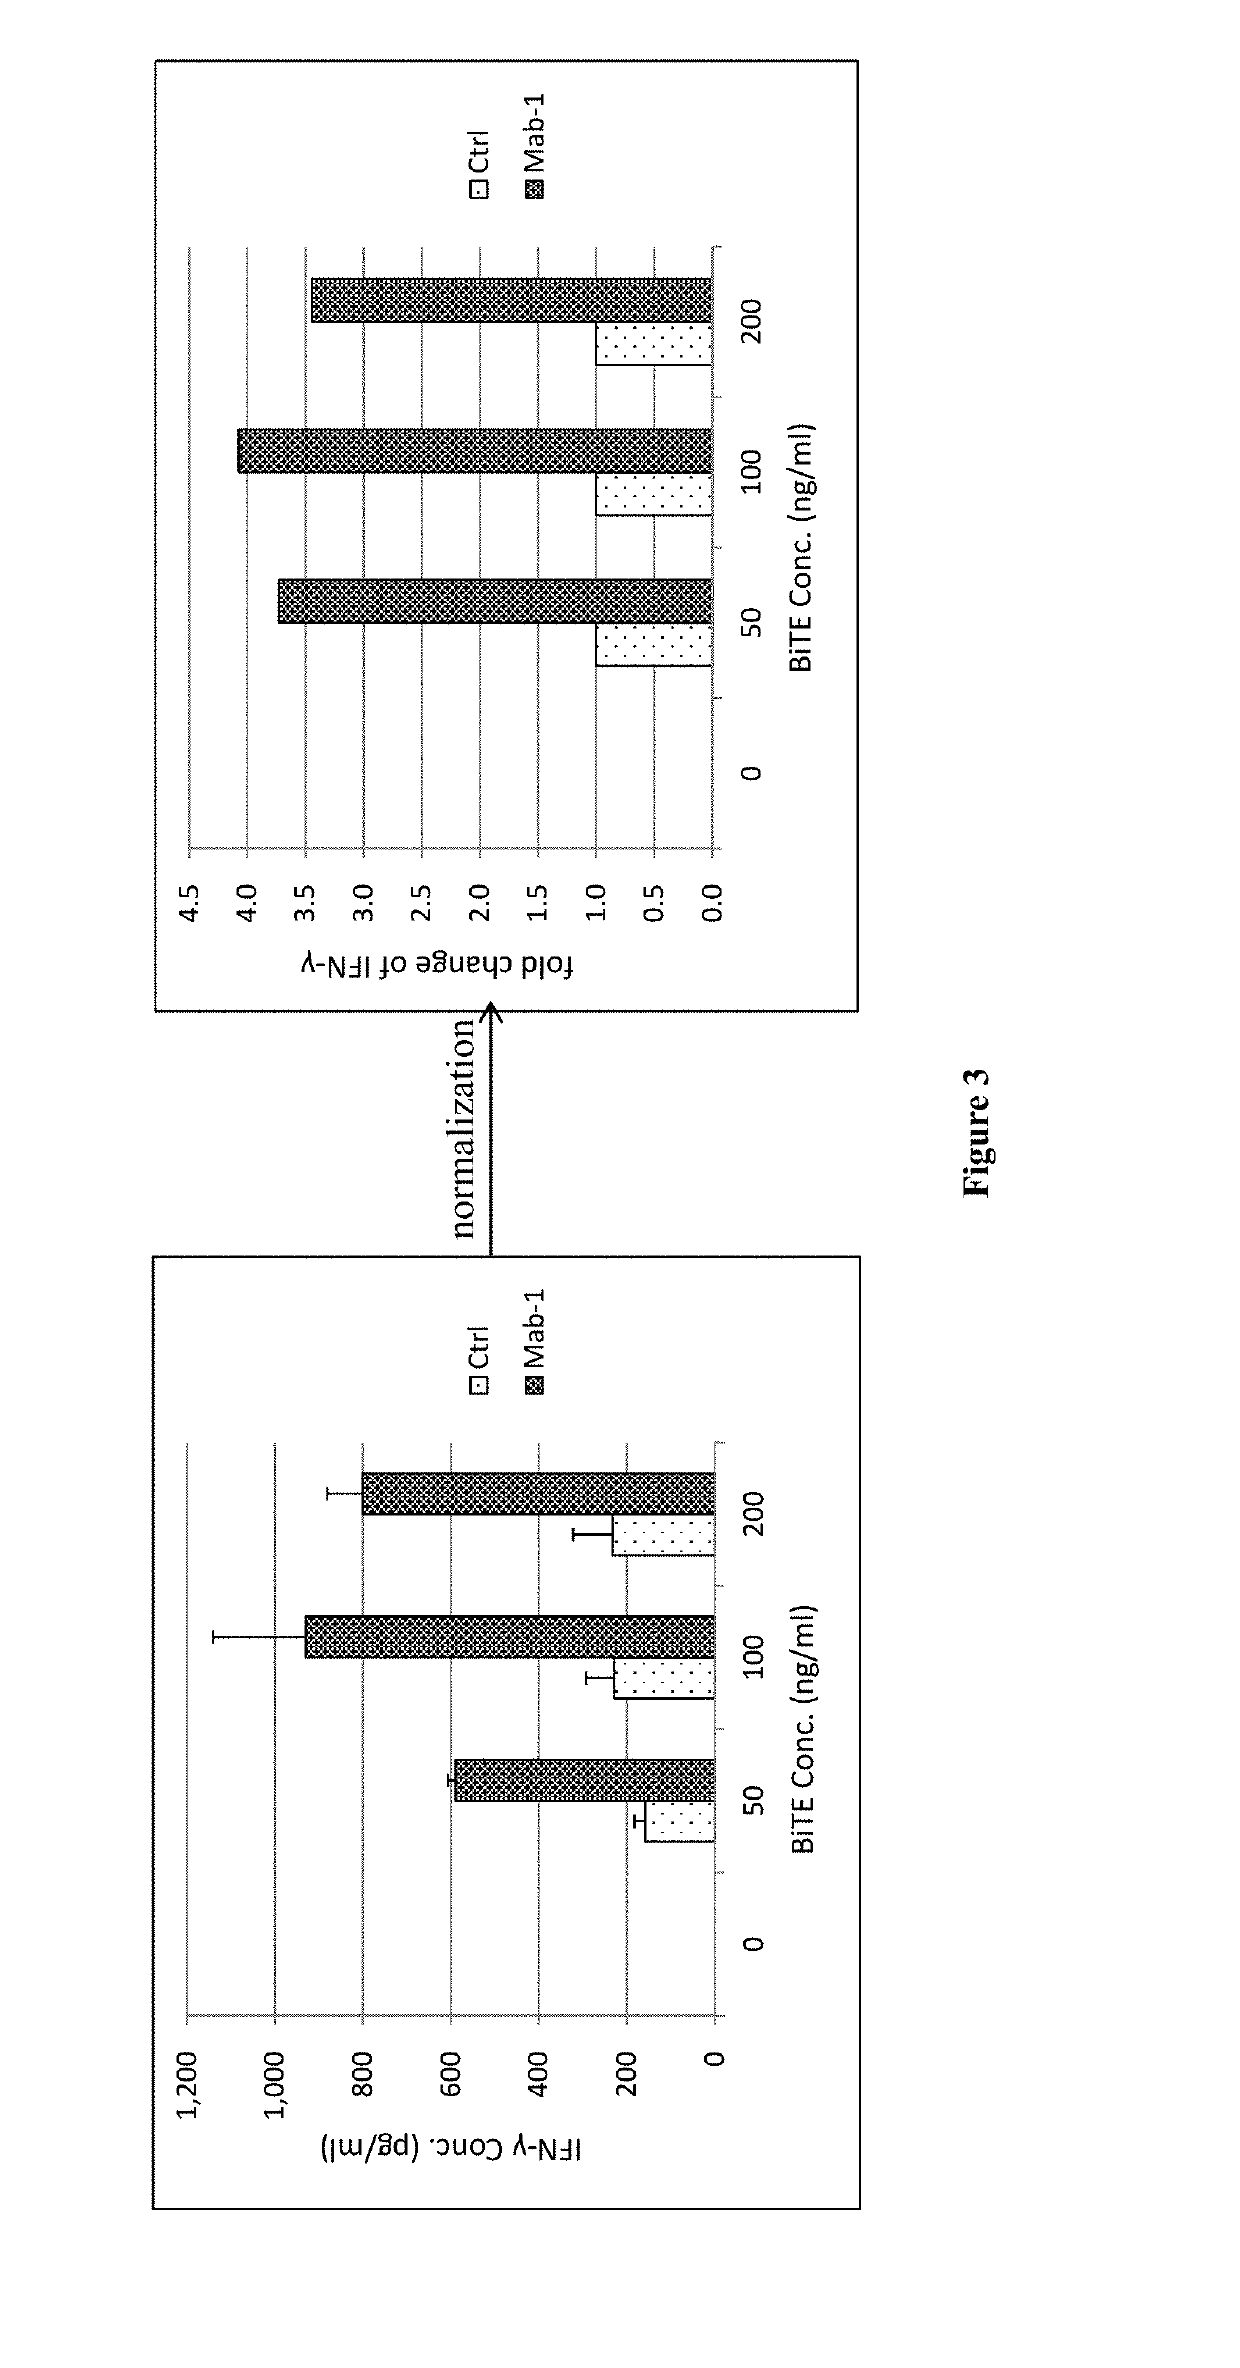 Method for predicting efficacy of immune checkpoint inhibitors in cancer patients